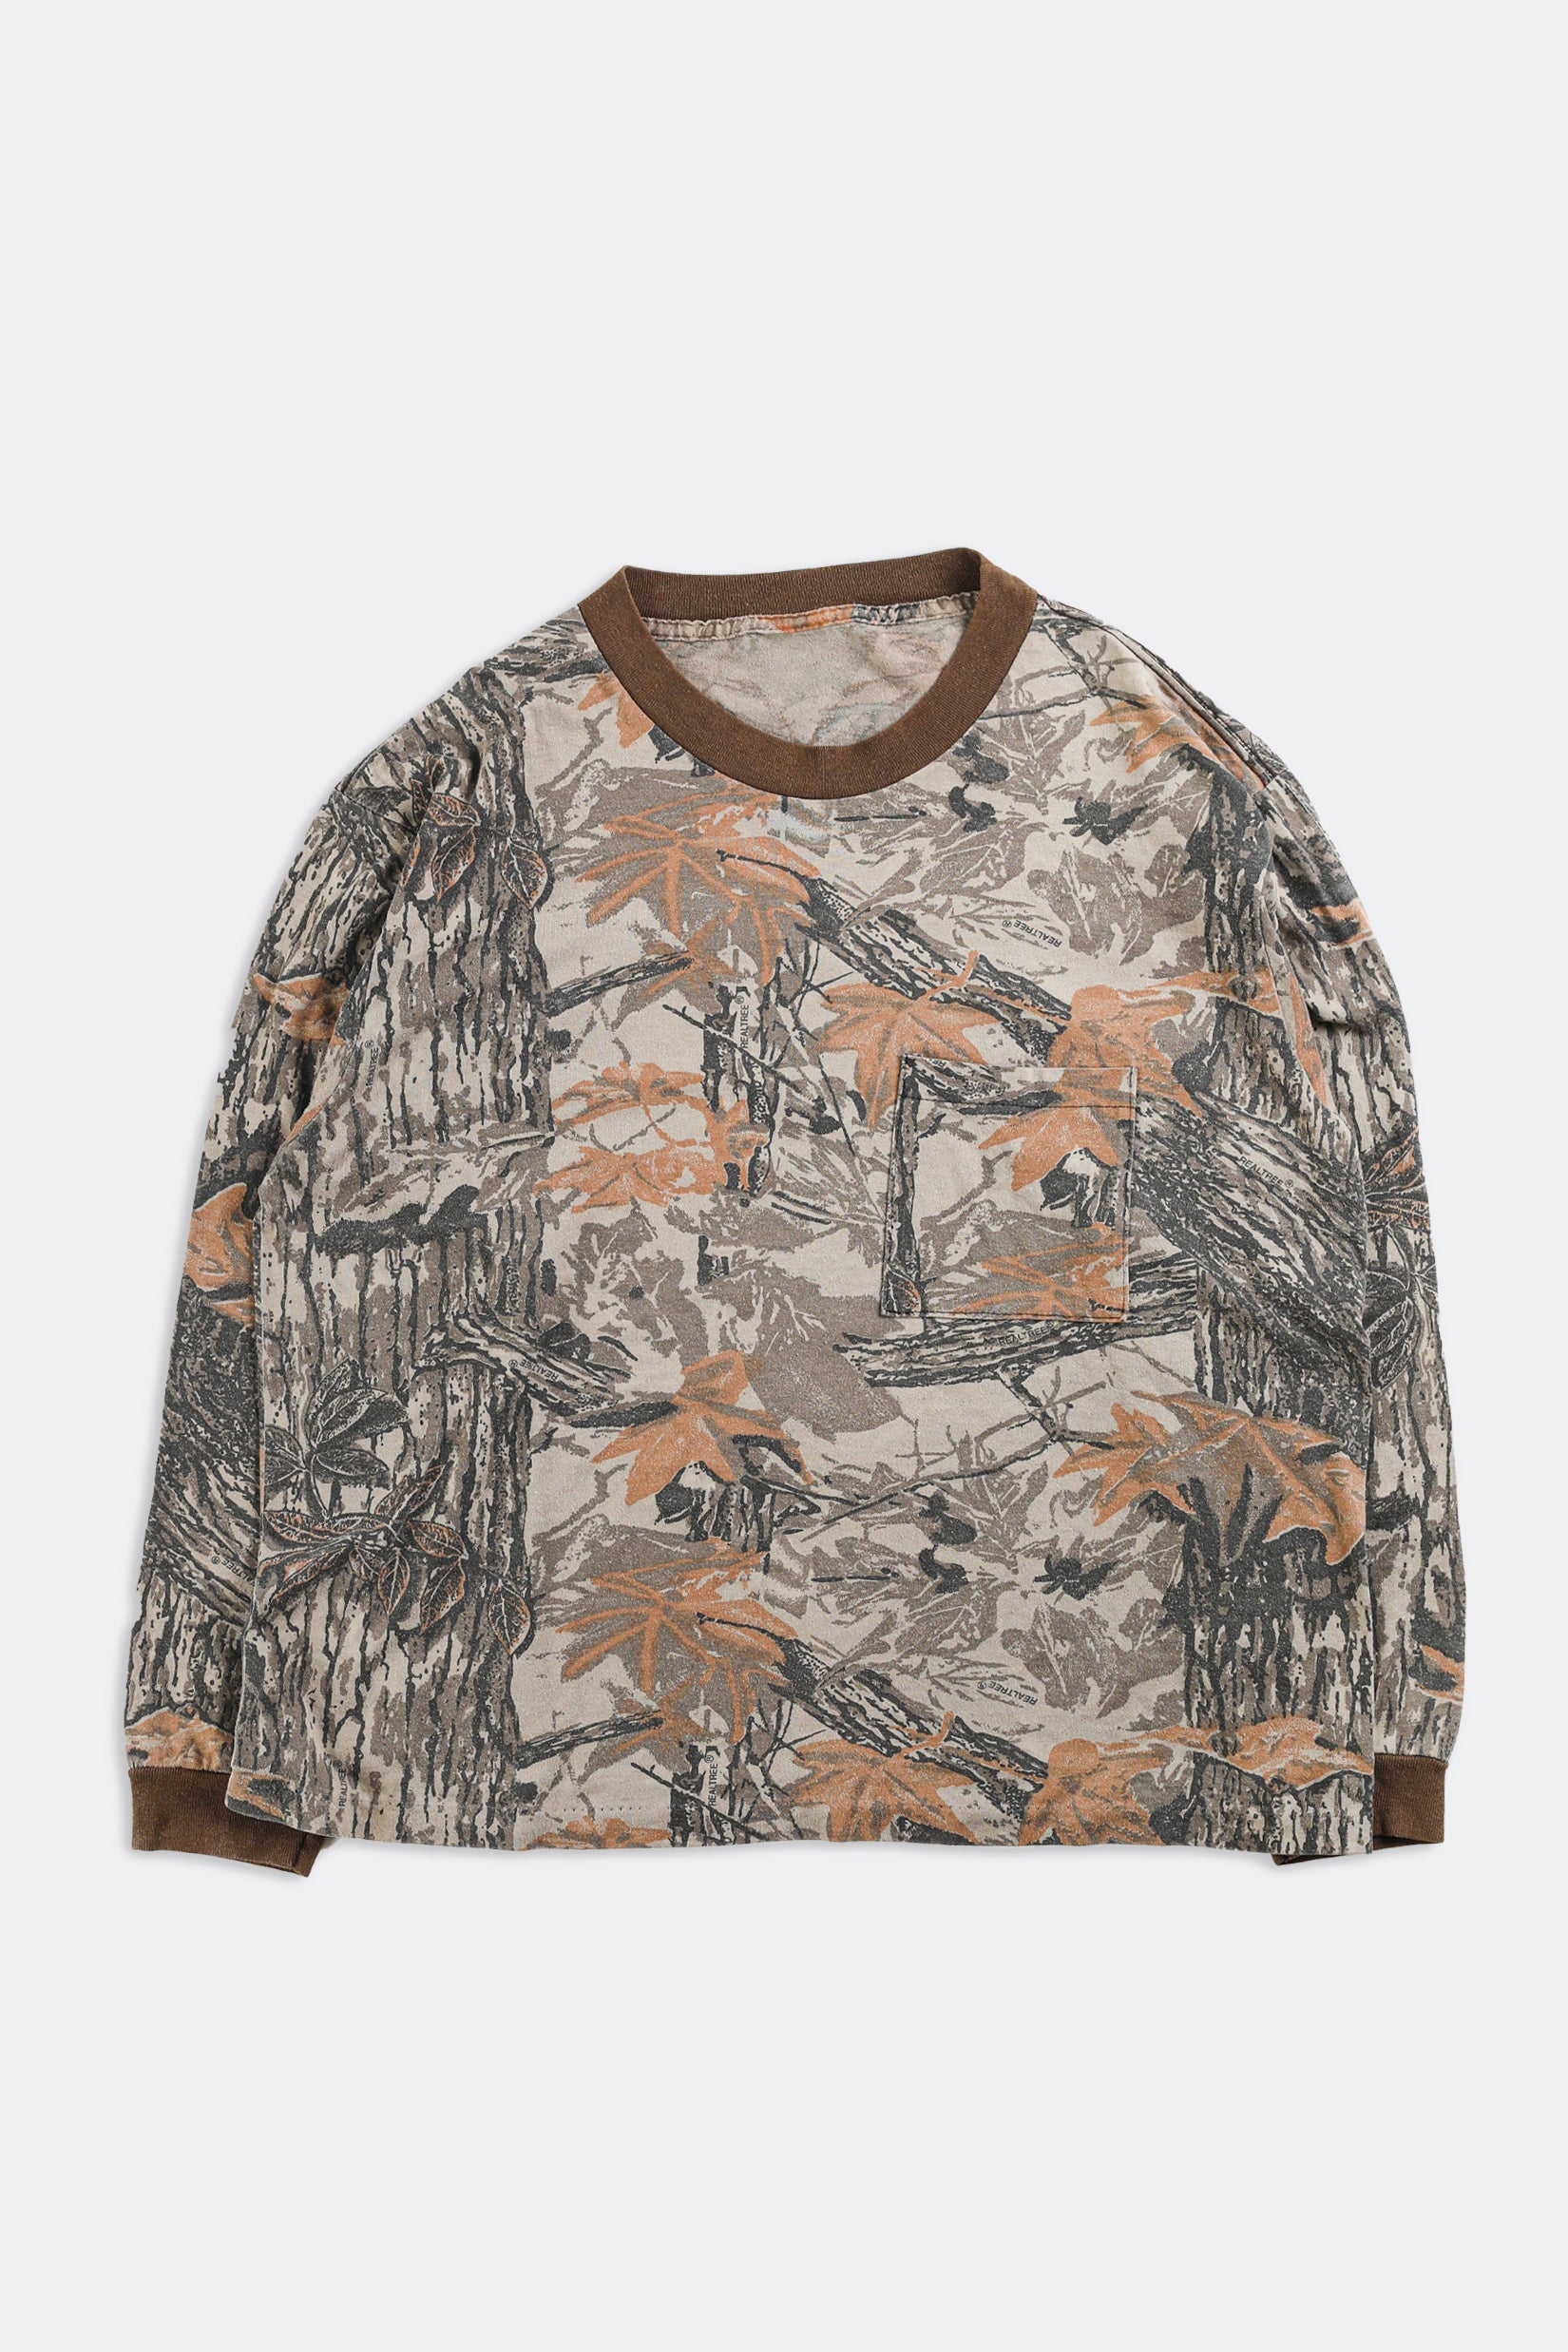 Vintage RealTree Camo Long Sleeve Tee - M – Frankie Collective